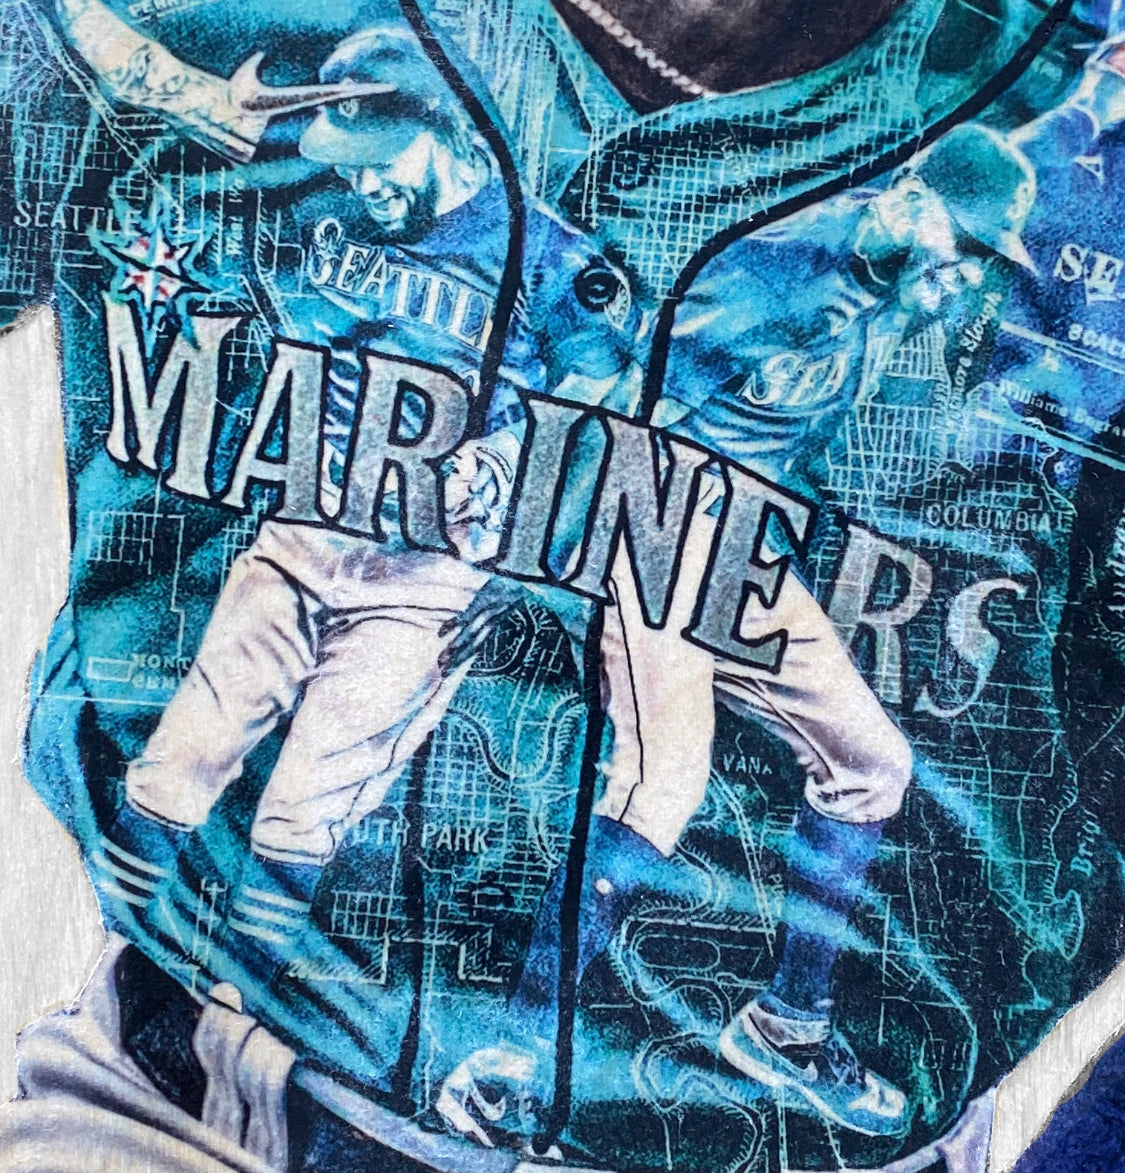  Kyle Lewis Seattle Mariners Poster Print, Baseball Player, Kyle  Lewis Gift, Canvas Art, ArtWork, Real Player, Posters for Wall SIZE 24''x32''  (61x81 cm): Posters & Prints